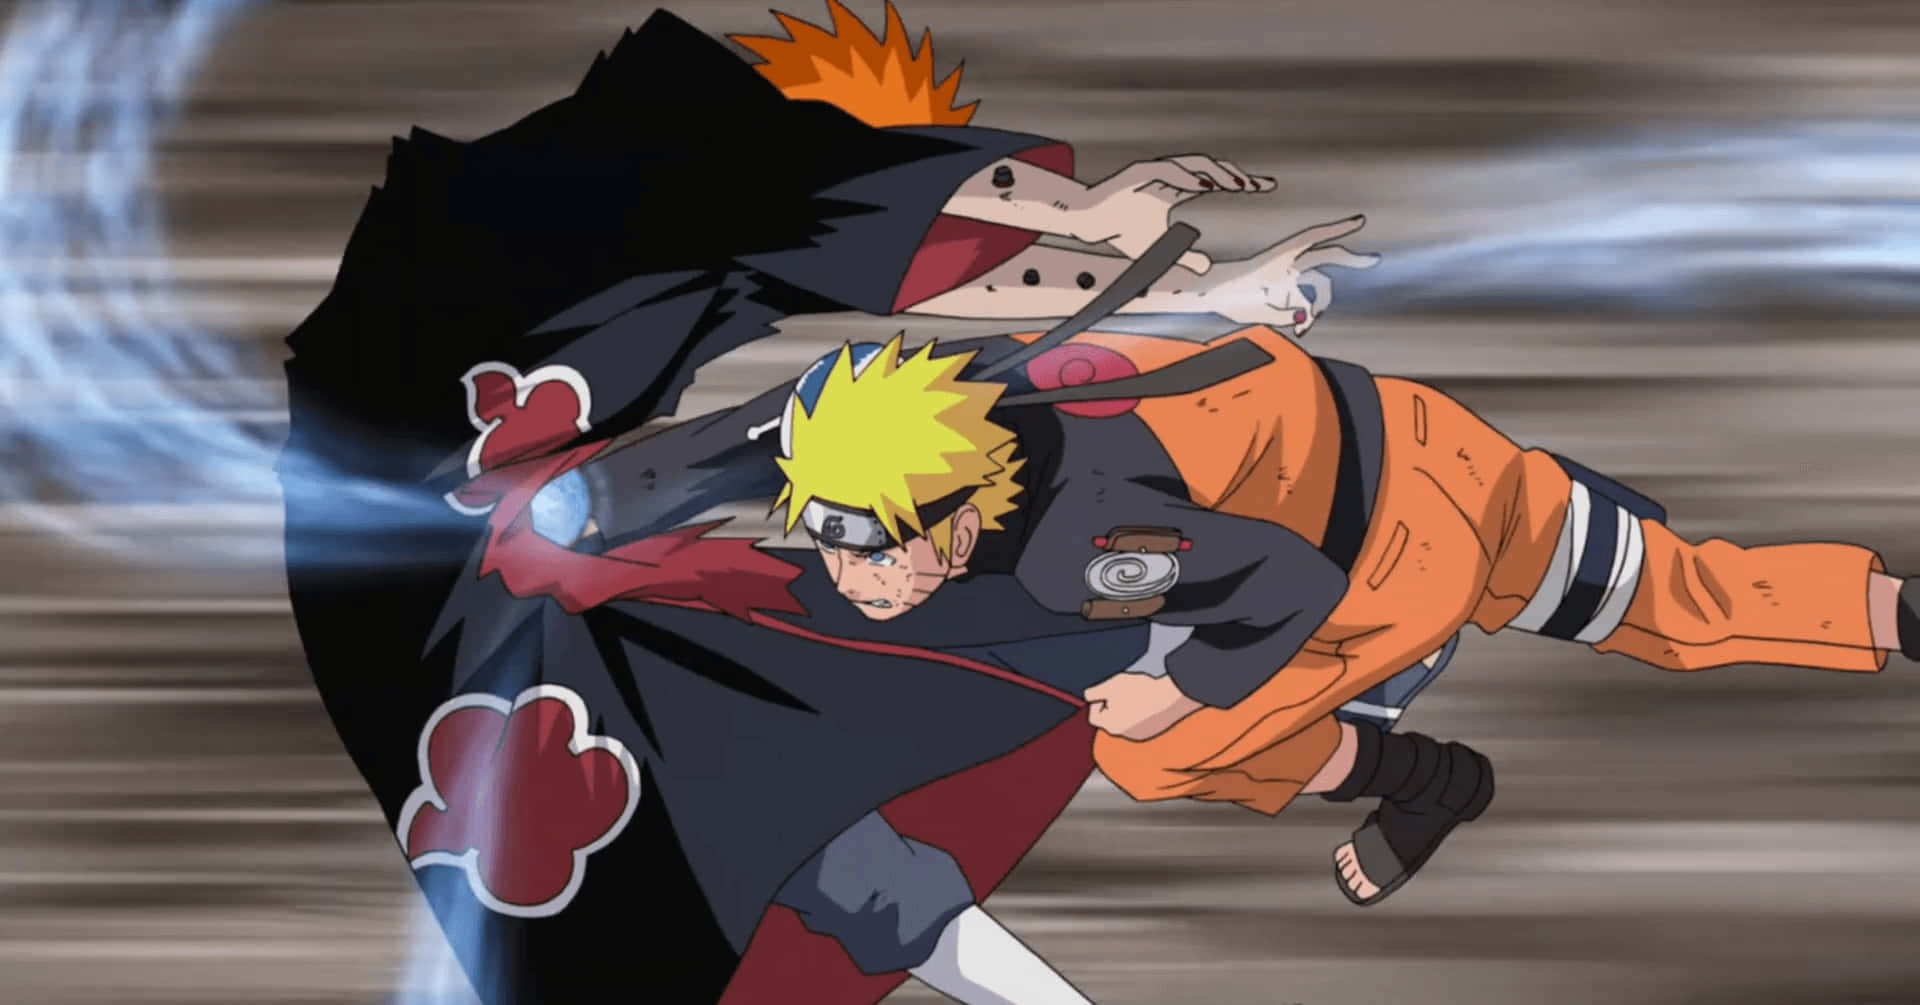 Naruto and Kakashi teaming up to take on the ninjas of the Hidden Leaf Village